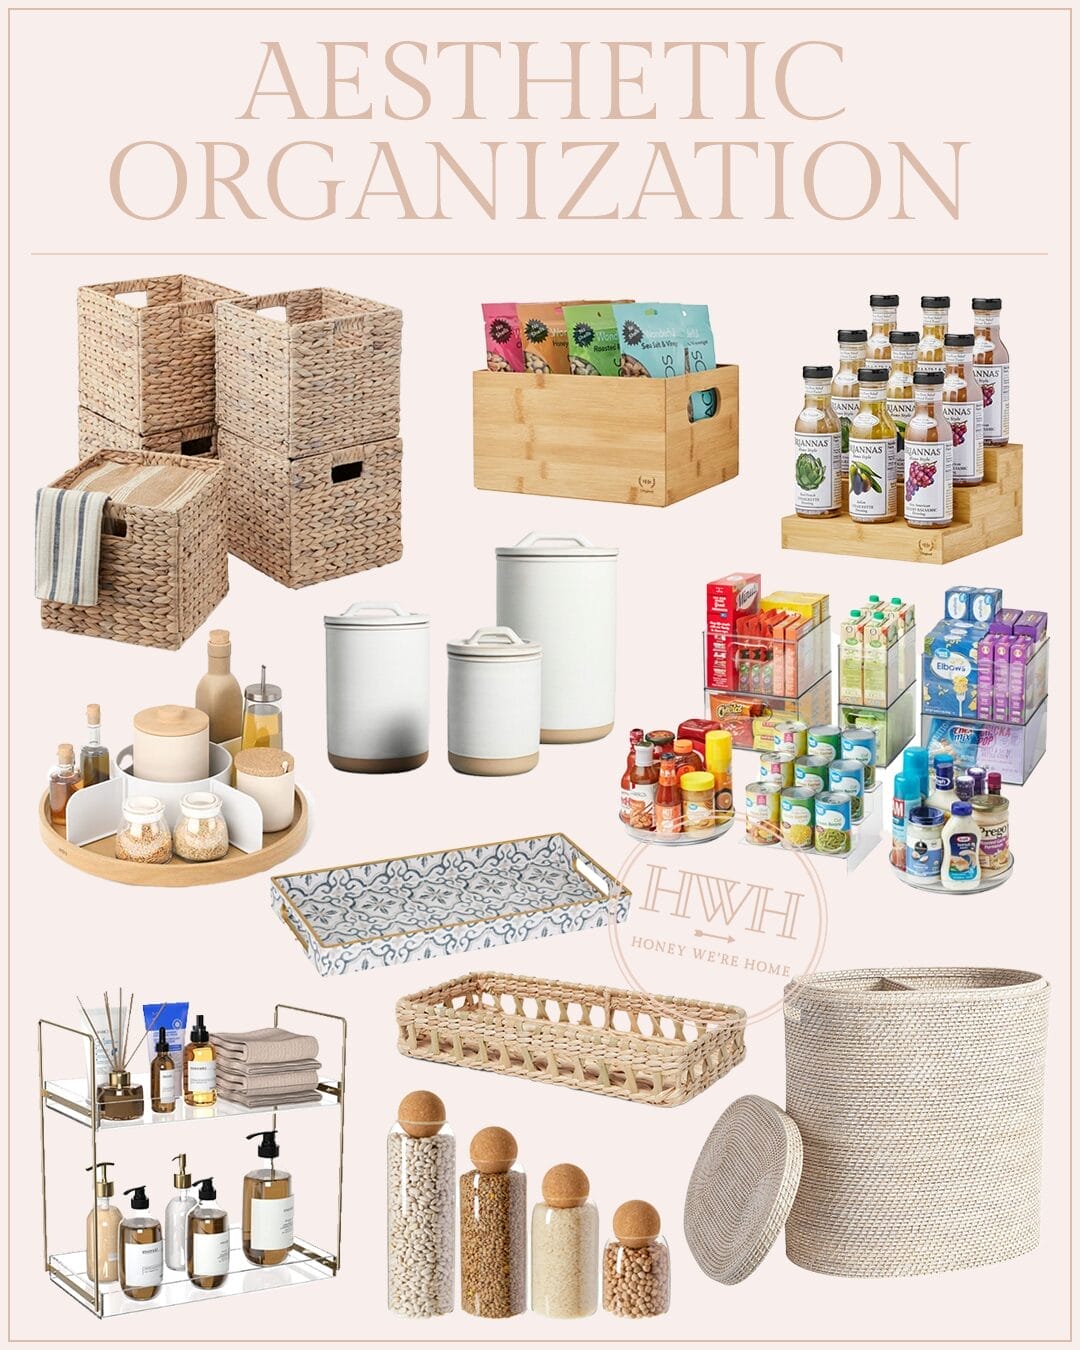 Let’s Get Organized for the New Year & Make Things Pretty